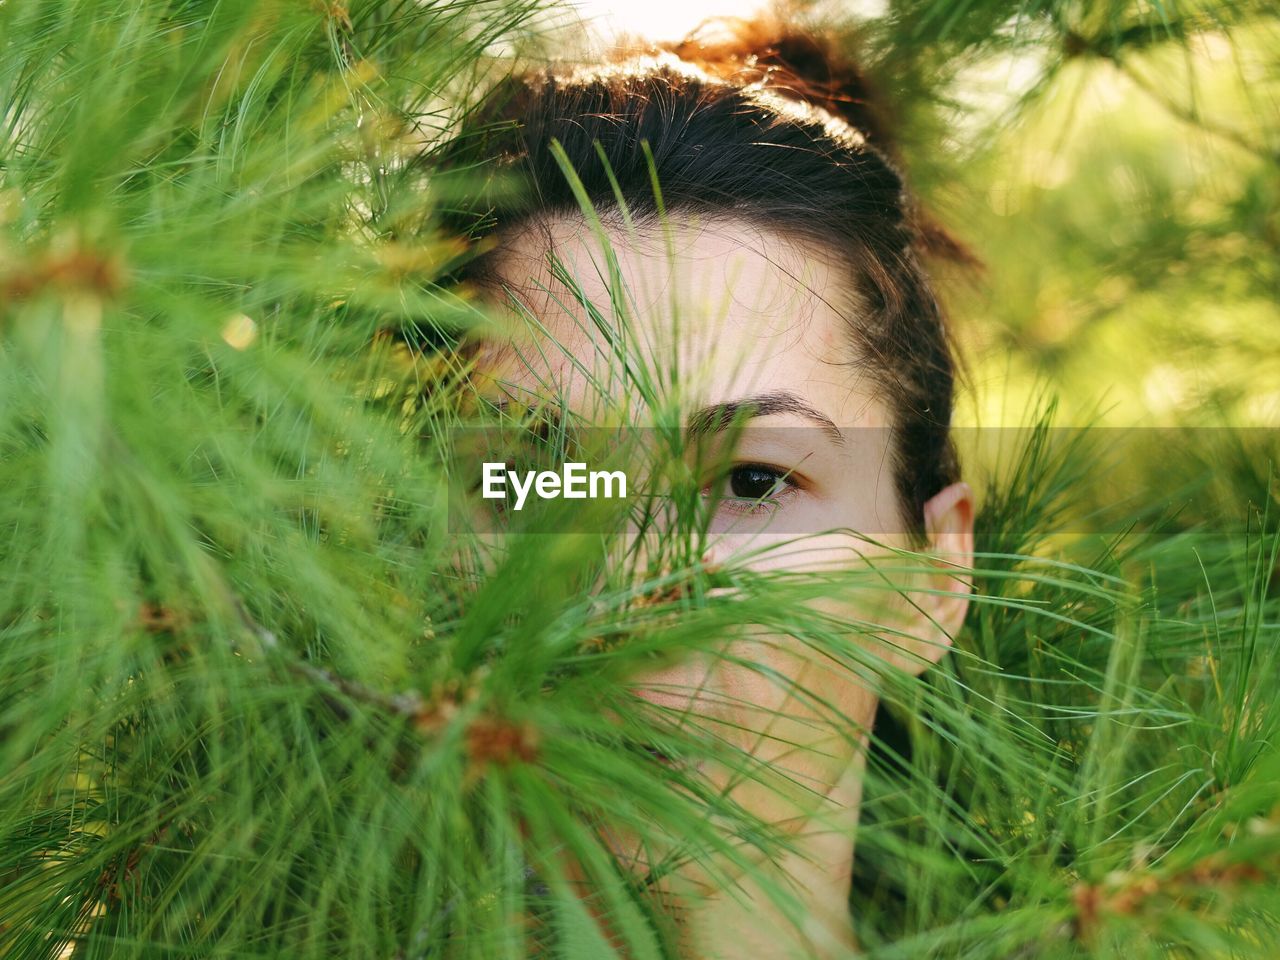 Close-up portrait of woman hiding in tree branches